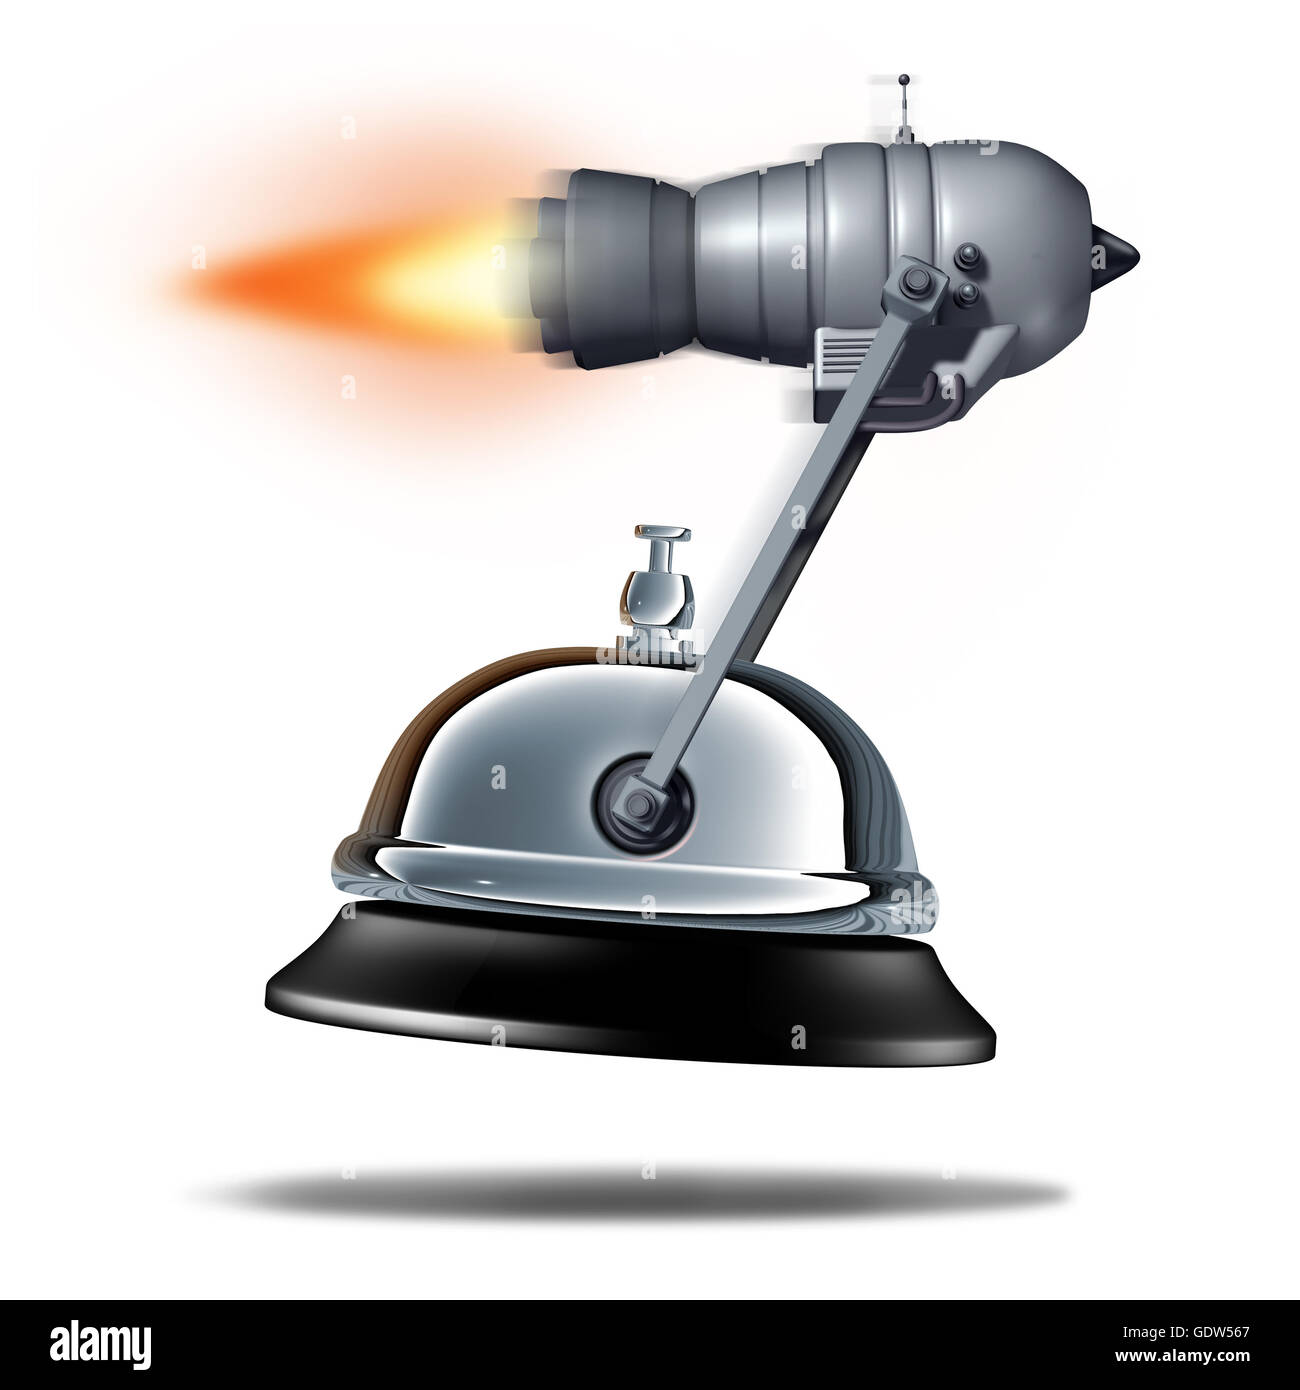 Fast service symbol as a service bell being transported by a rocket jet engine as a quick customer support business symbol as a Stock Photo